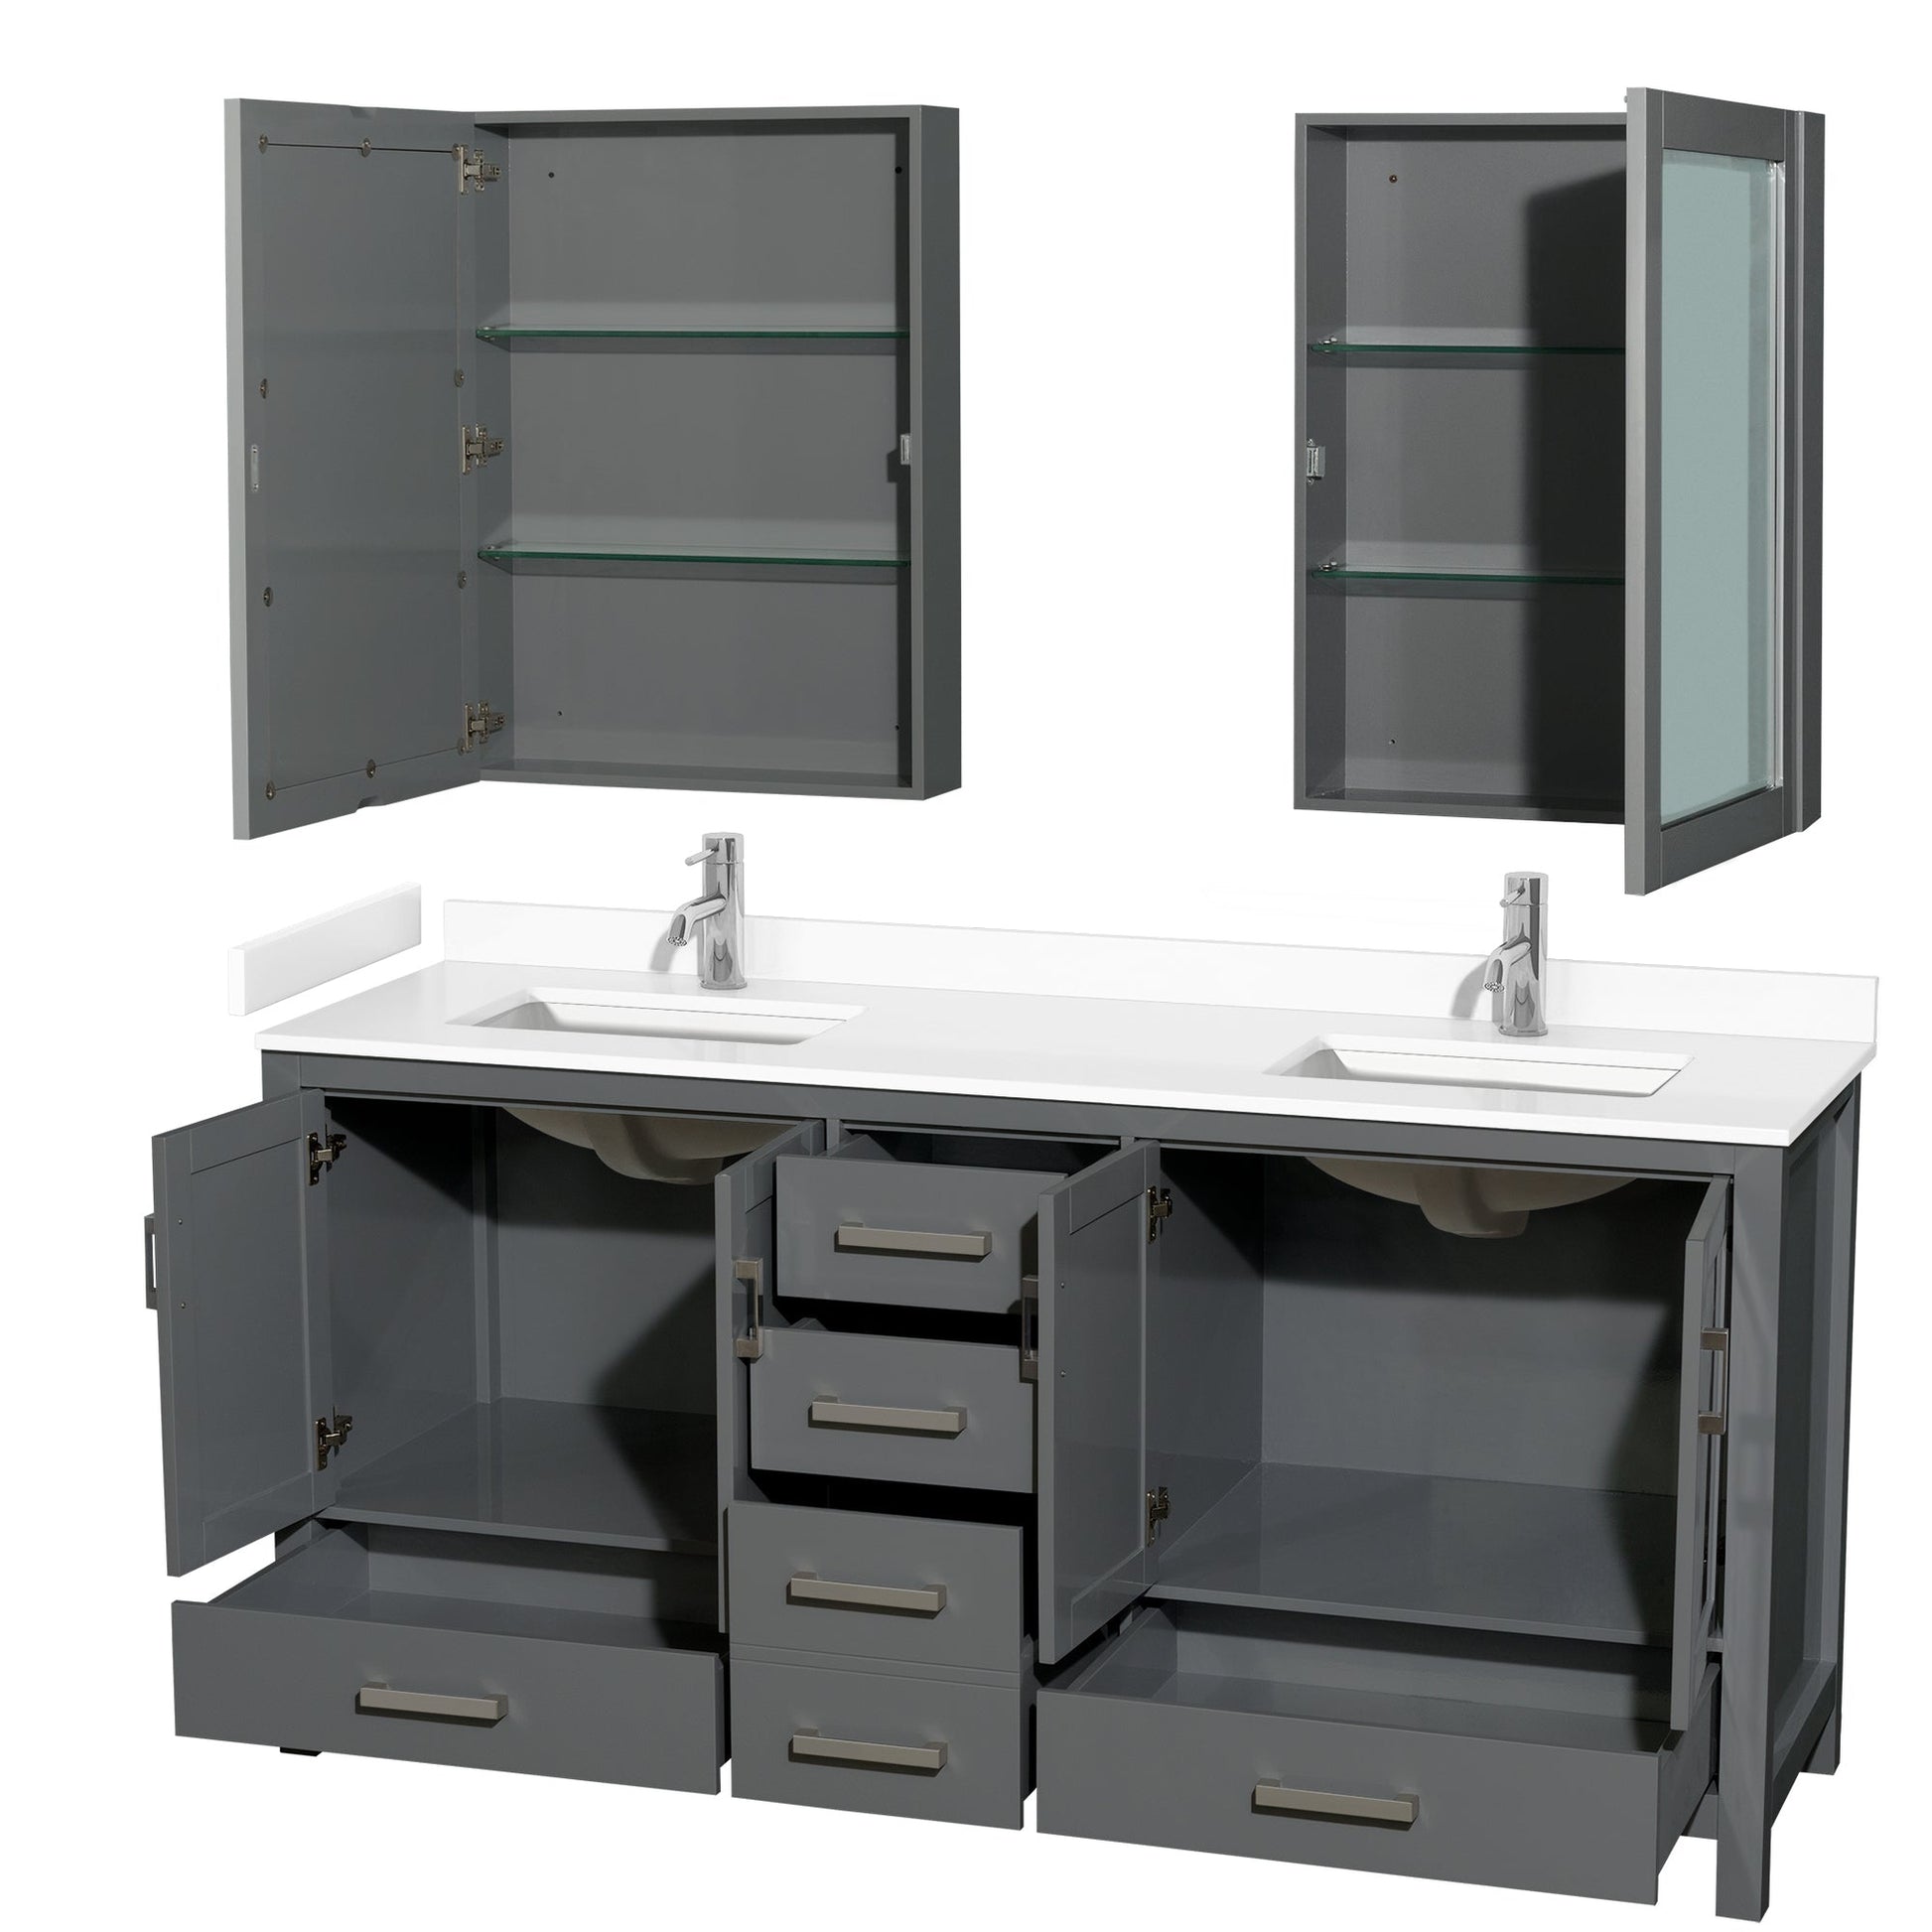 Wyndham Collection Sheffield 72" Double Bathroom Vanity in Dark Gray, White Cultured Marble Countertop, Undermount Square Sinks, Medicine Cabinet